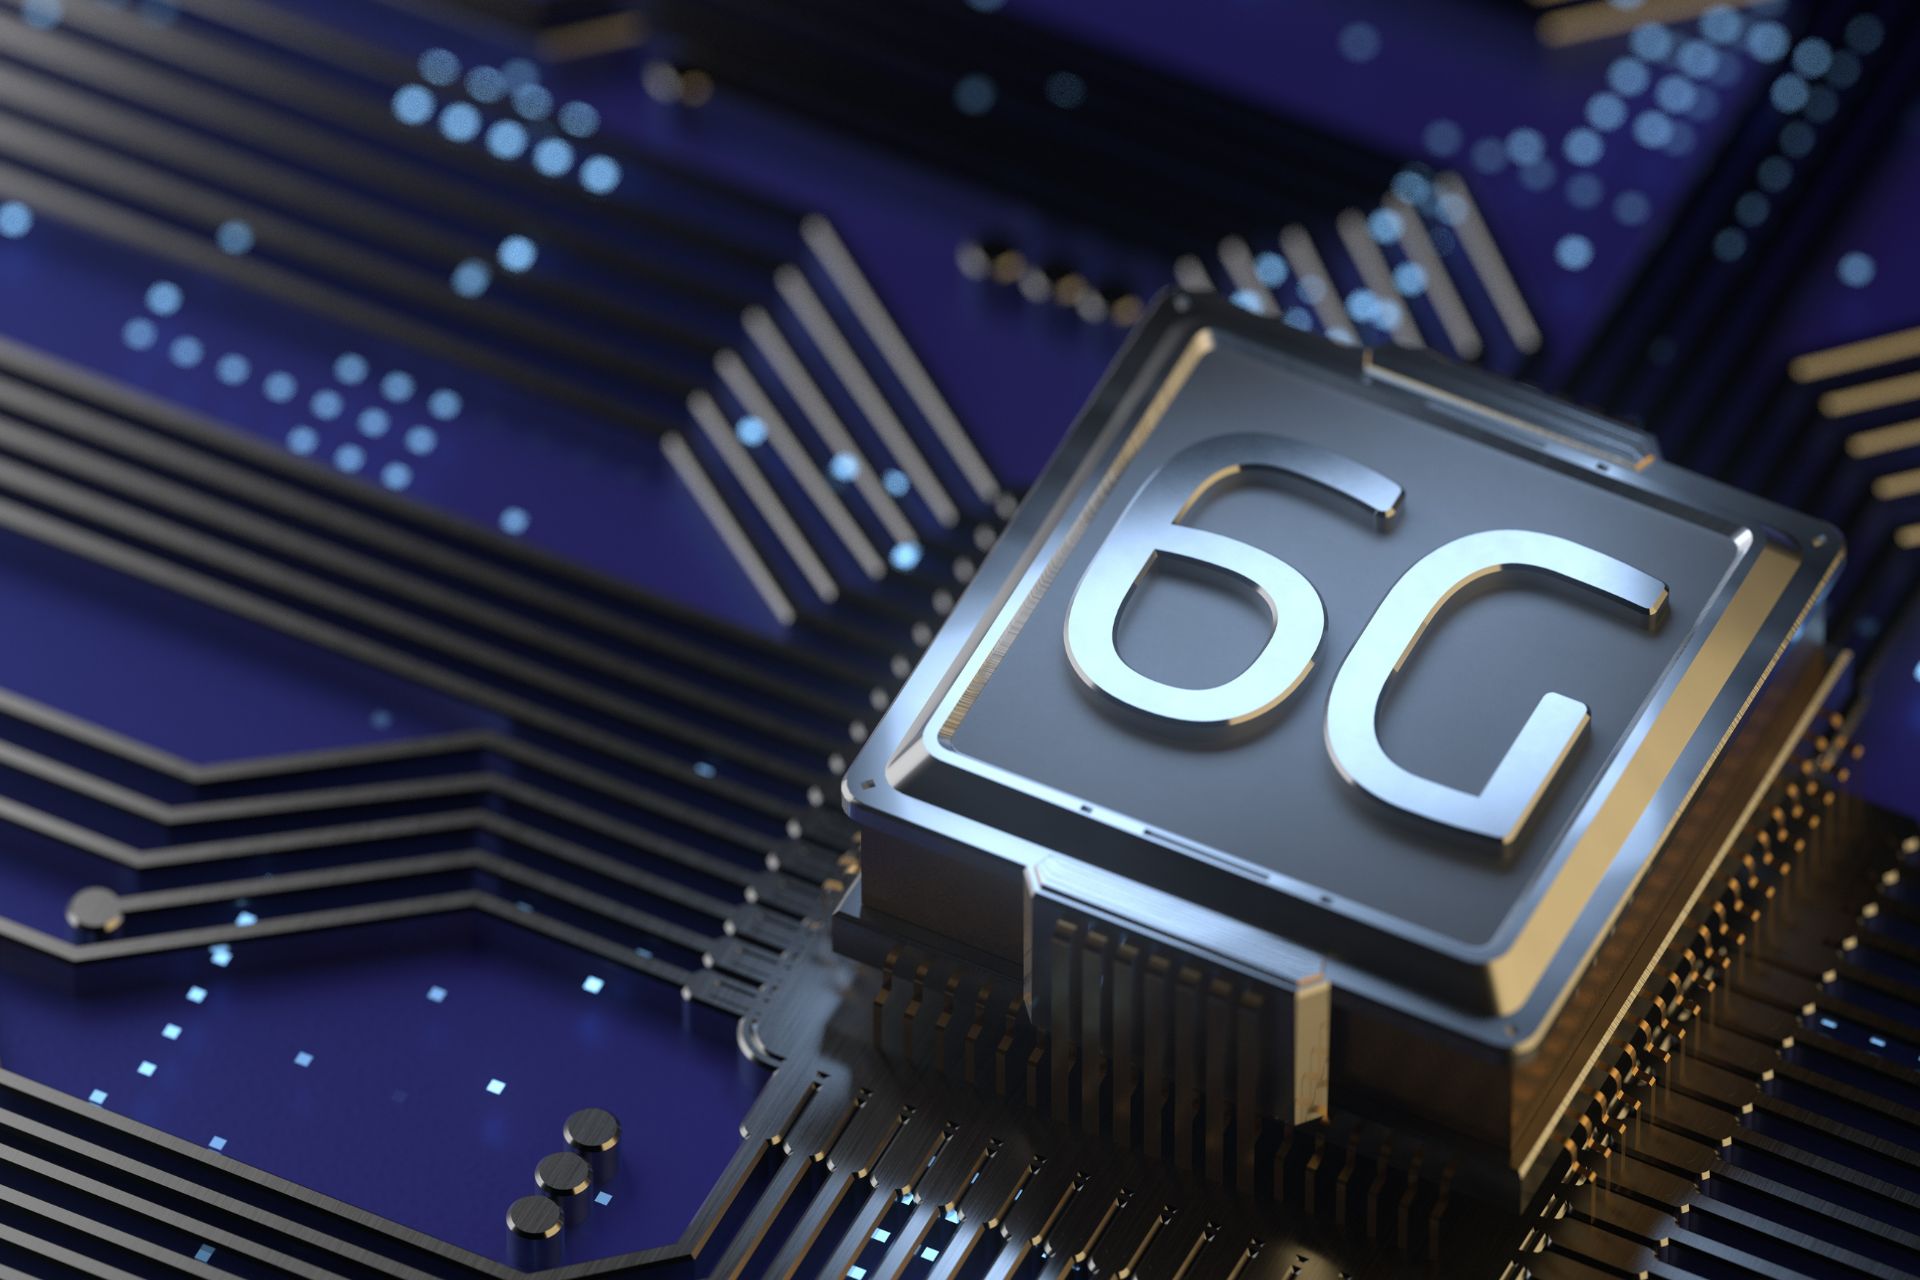 6G smartphone: "6th Generation" technology is expected to have a transmission power of 100 Gbps